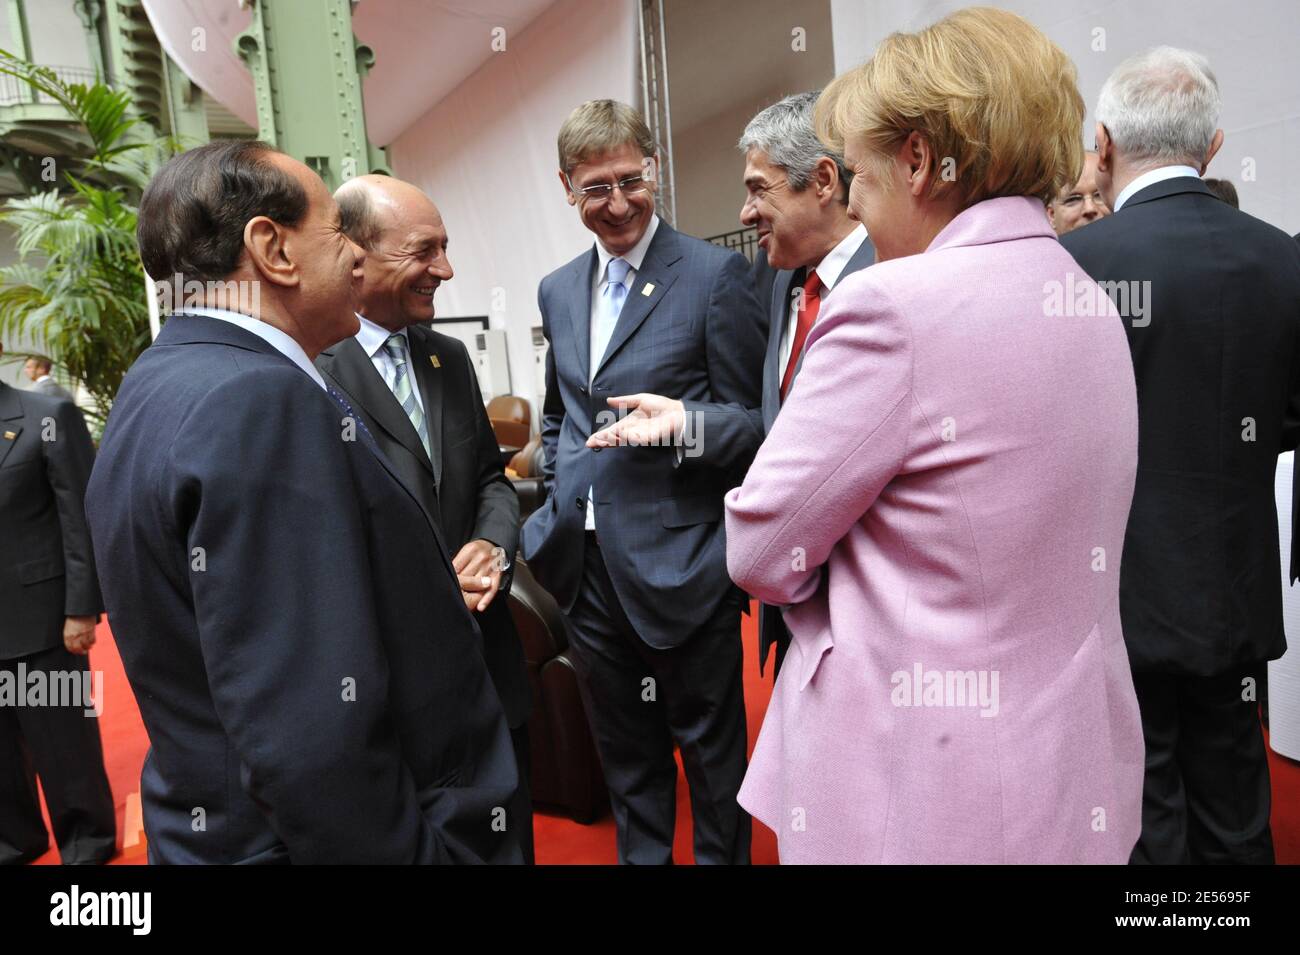 Italian President Silvio Berlusconi, Hungary's Prime minister Ferenc Gyurcsany, Portuguese Prime Minister Jose Socrates and German Chancellor Angela Merkel during Paris' Union for the Mediterranean founding summit at the Grand Palais in Paris, France on July 13, 2008. French President Nicolas Sarkozy and 42 leaders launch today a union between Europe and its Mediterranean neighbours but tensions among Middle East countries could undermine the grand plan. Photo by Elodie Gregoire/ABACAPRESS.COM Stock Photo